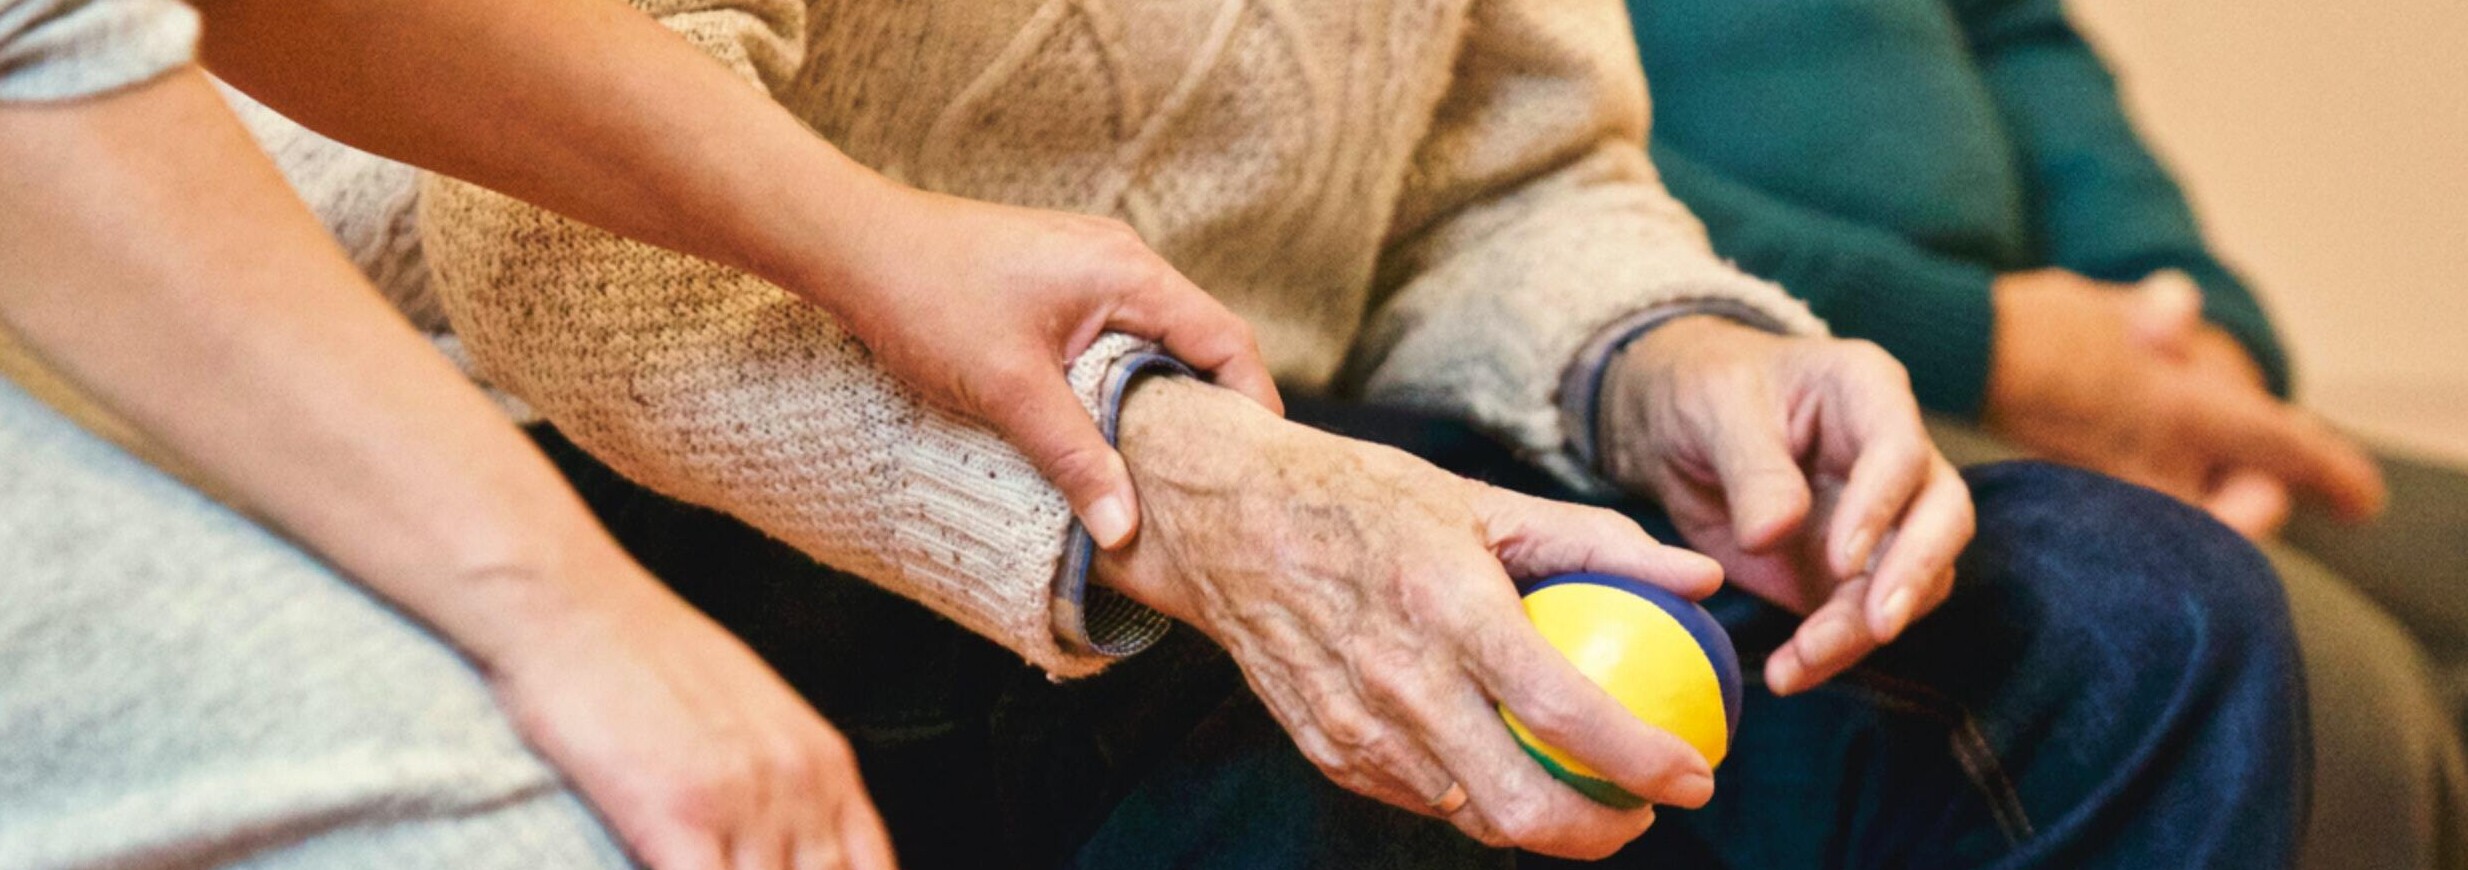 Close up of woman's hand resting on forearm of elderly man holding a strength ball